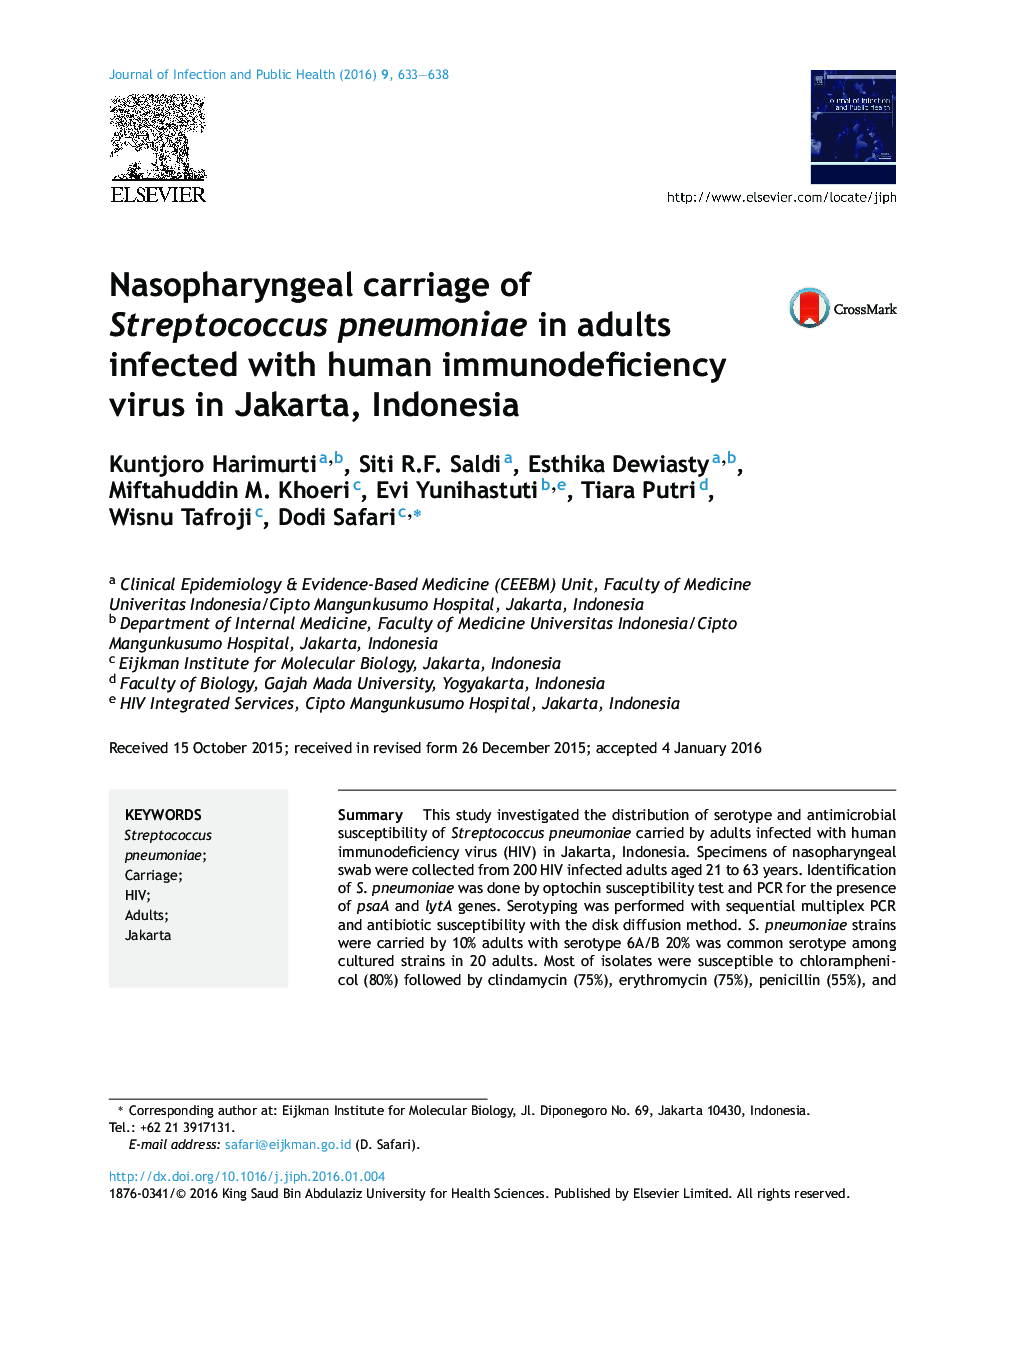 Nasopharyngeal carriage of Streptococcus pneumoniae in adults infected with human immunodeficiency virus in Jakarta, Indonesia